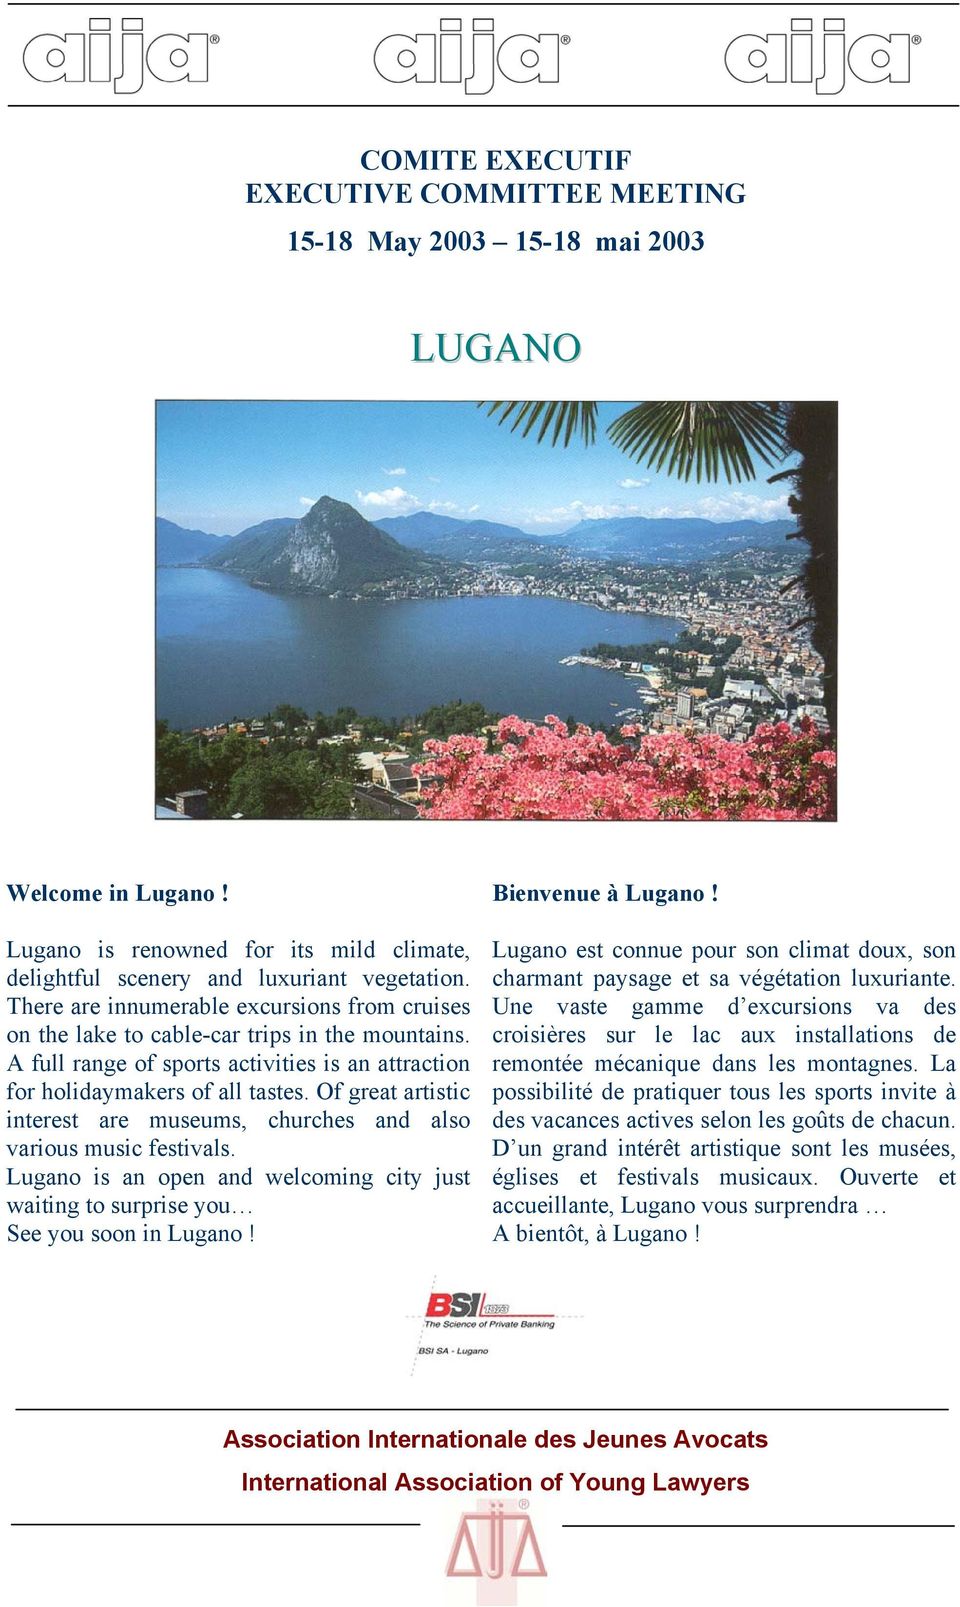 Of great artistic interest are museums, churches and also various music festivals. Lugano is an open and welcoming city just waiting to surprise you See you soon in Lugano! Bienvenue à Lugano!